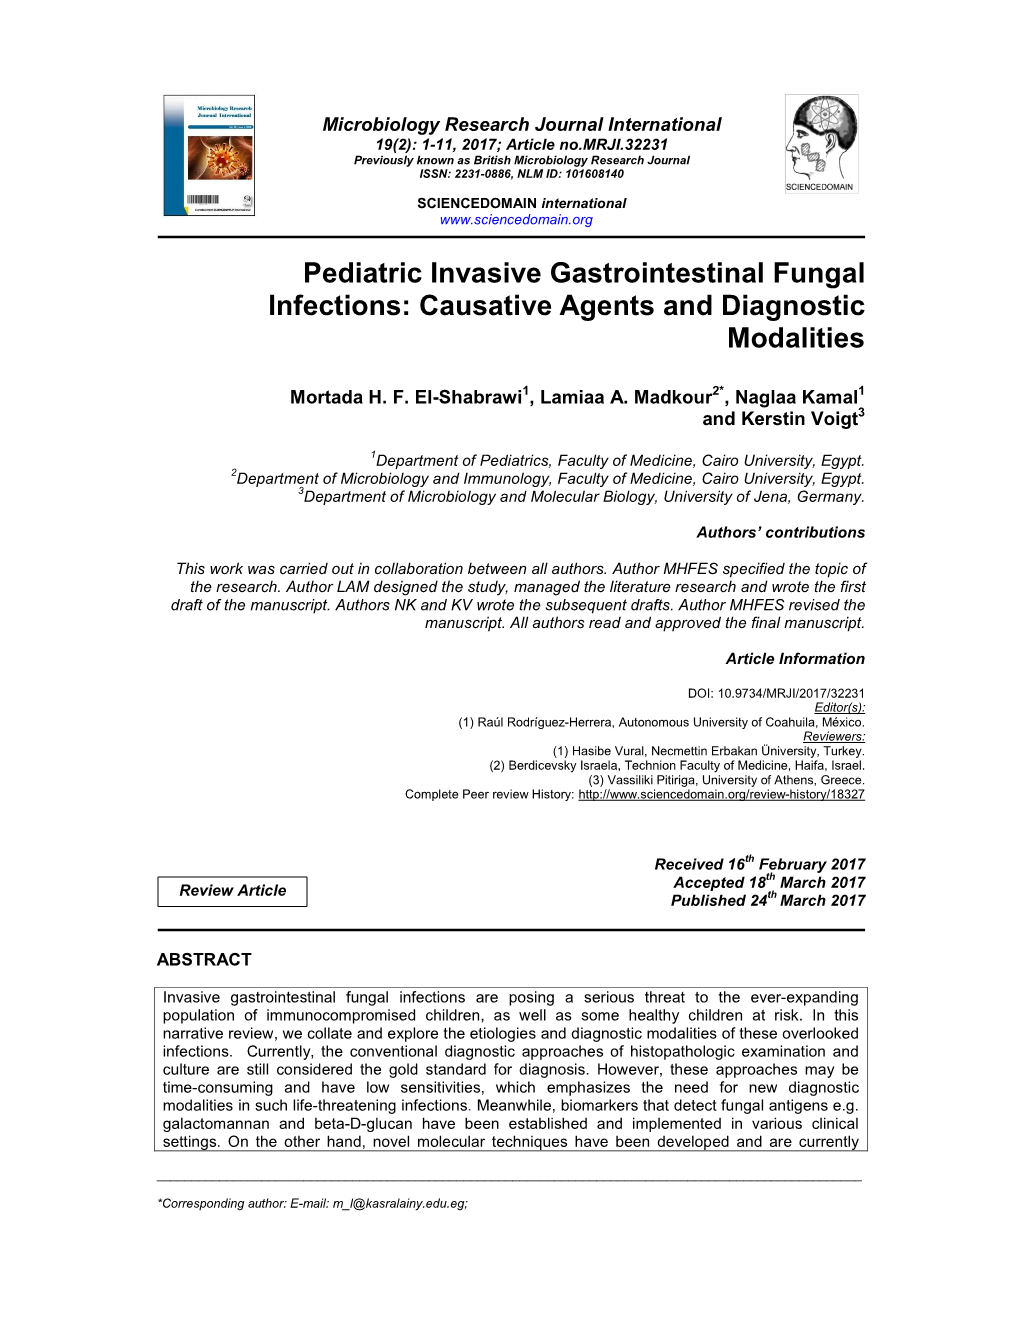 Pediatric Invasive Gastrointestinal Fungal Infections: Causative Agents and Diagnostic Modalities